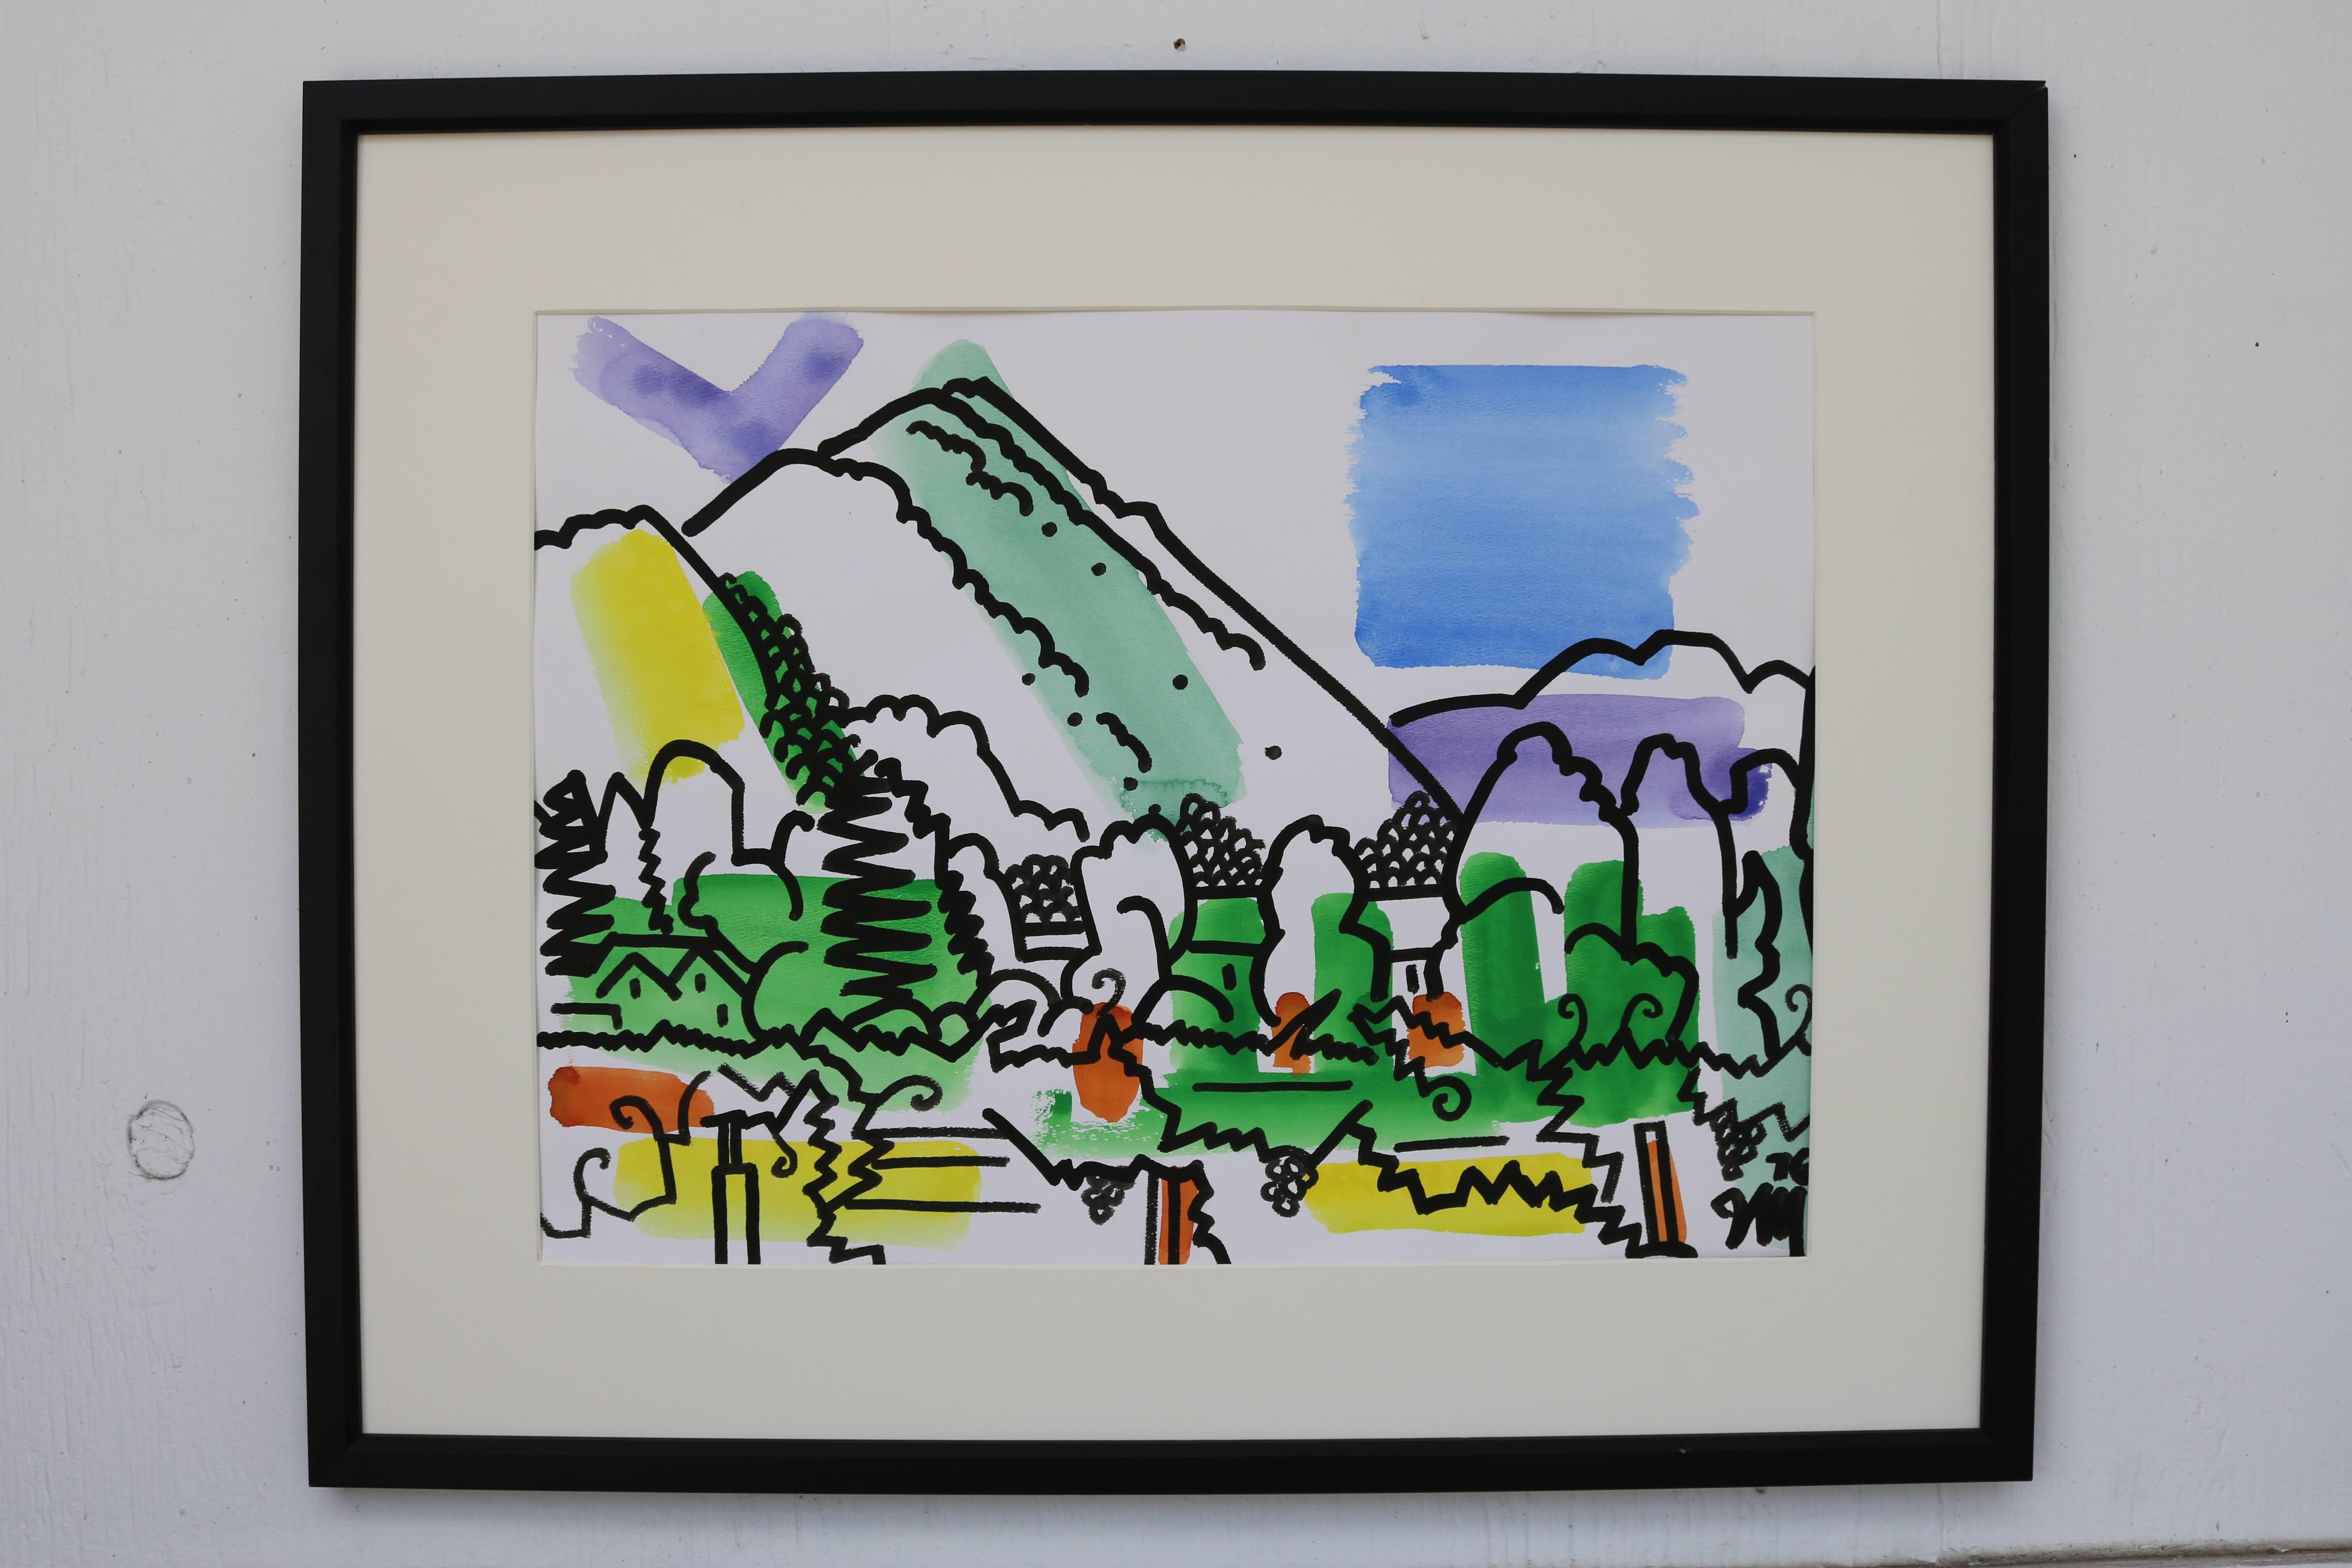 Framed watercolor landscape signed by artist James McCray in 1976.
About the artist:
McCray taught at the California School of Fine Arts in San Francisco during the 1940s. Hassel Smith and David Park were also at the school. McCray had solo and